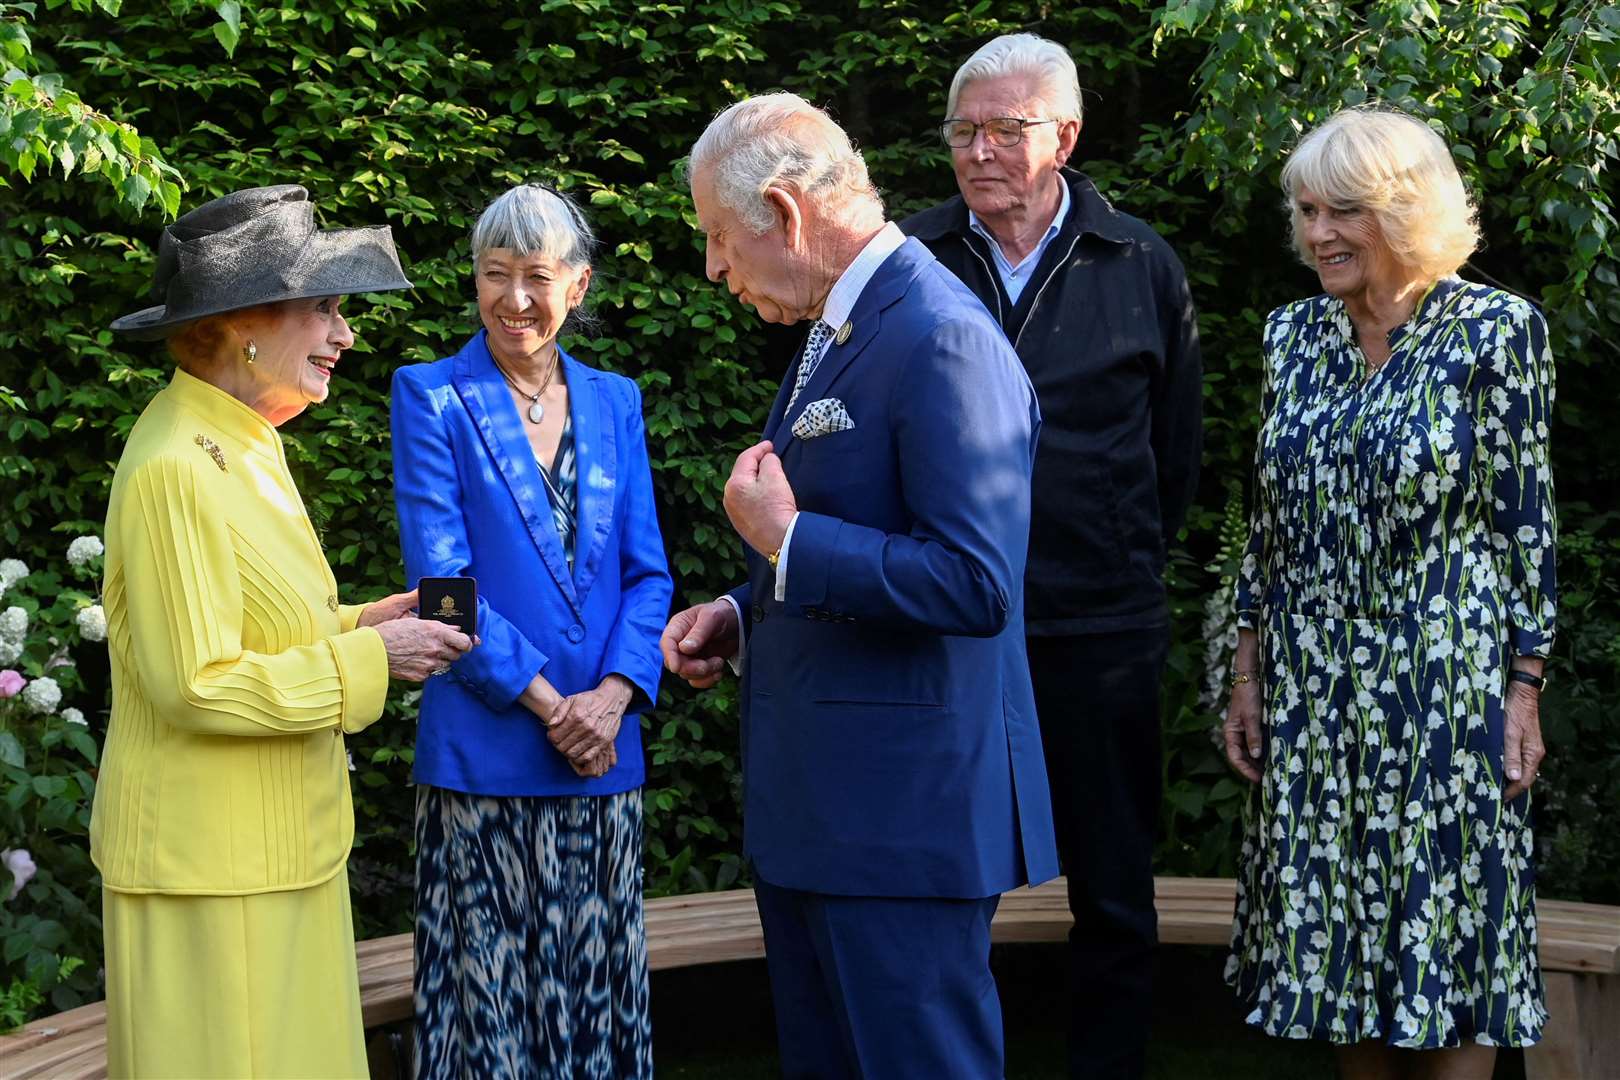 The King and Queen speak to Baroness Janet Fookes, Piet Oudolf and Judy Ling Wong after awarding them the Elizabeth Medal of Honour in the Royal Horticultural Society Garden of Royal Reflection and Celebration during a visit to the RHS Chelsea Flower (Toby Melville/PA)